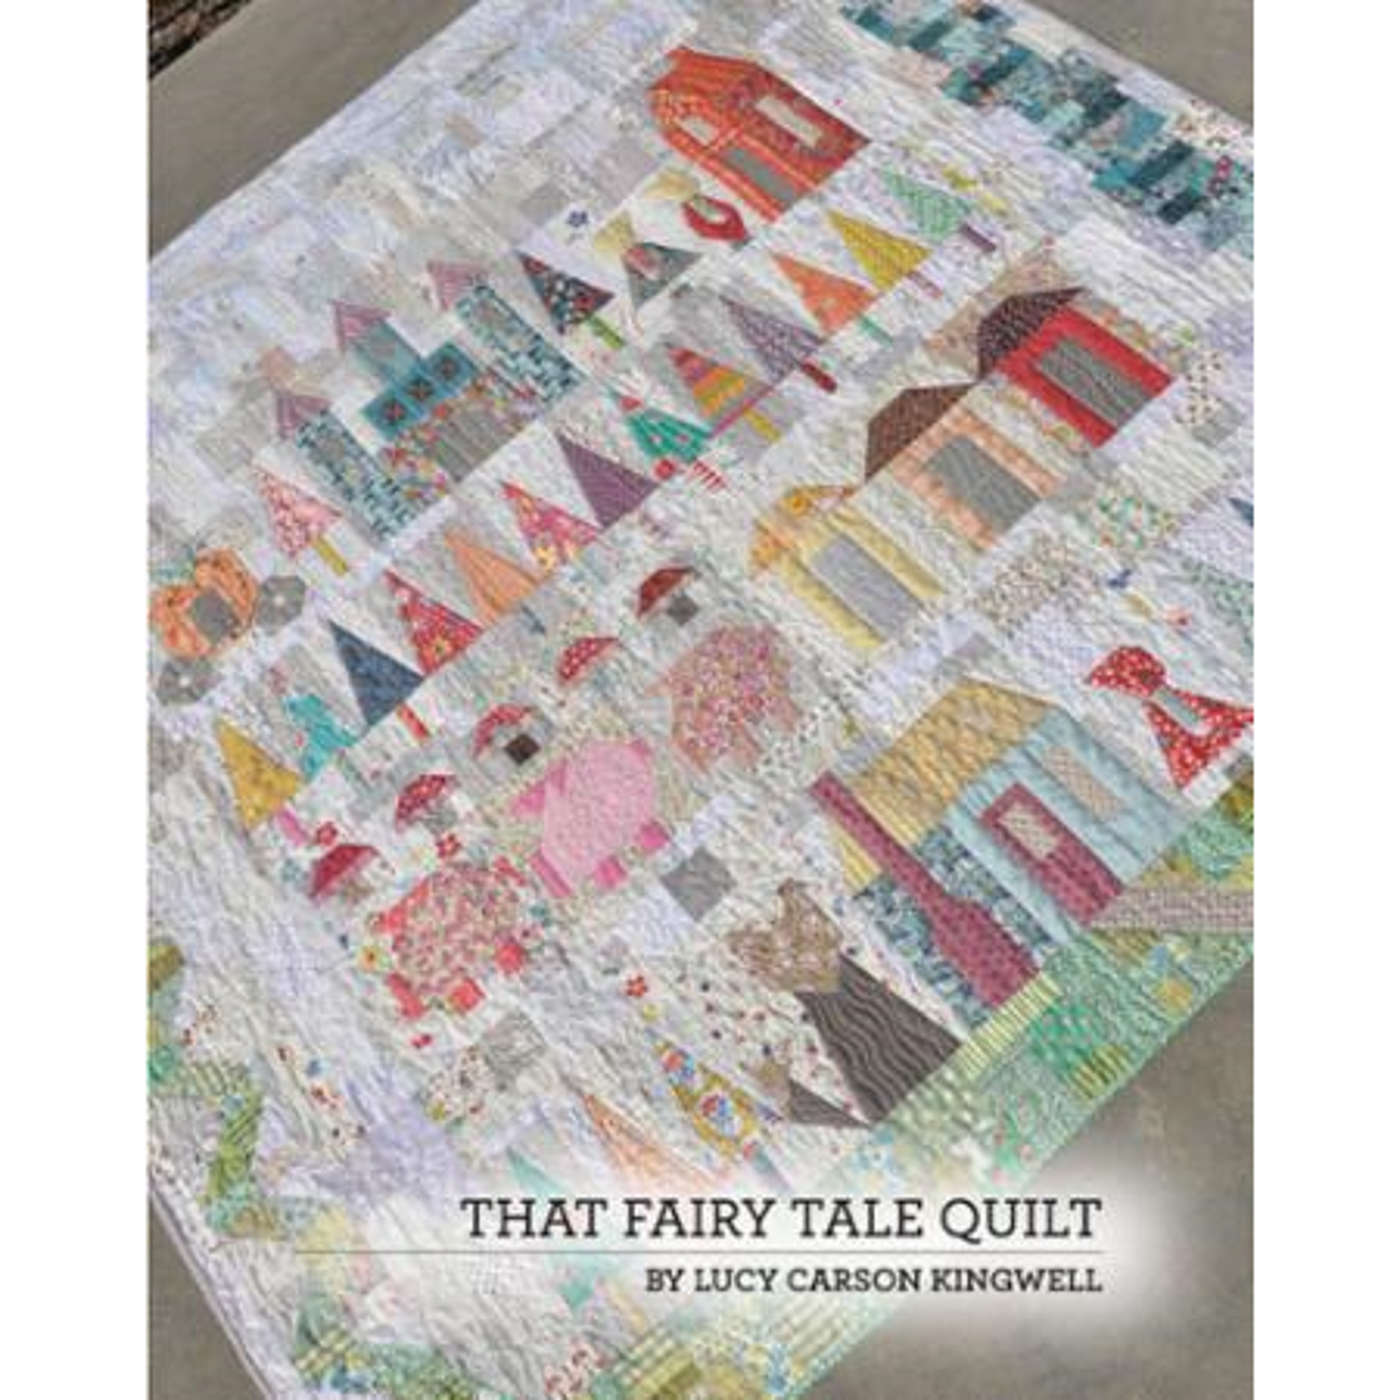 That Fairy Tate Quilt